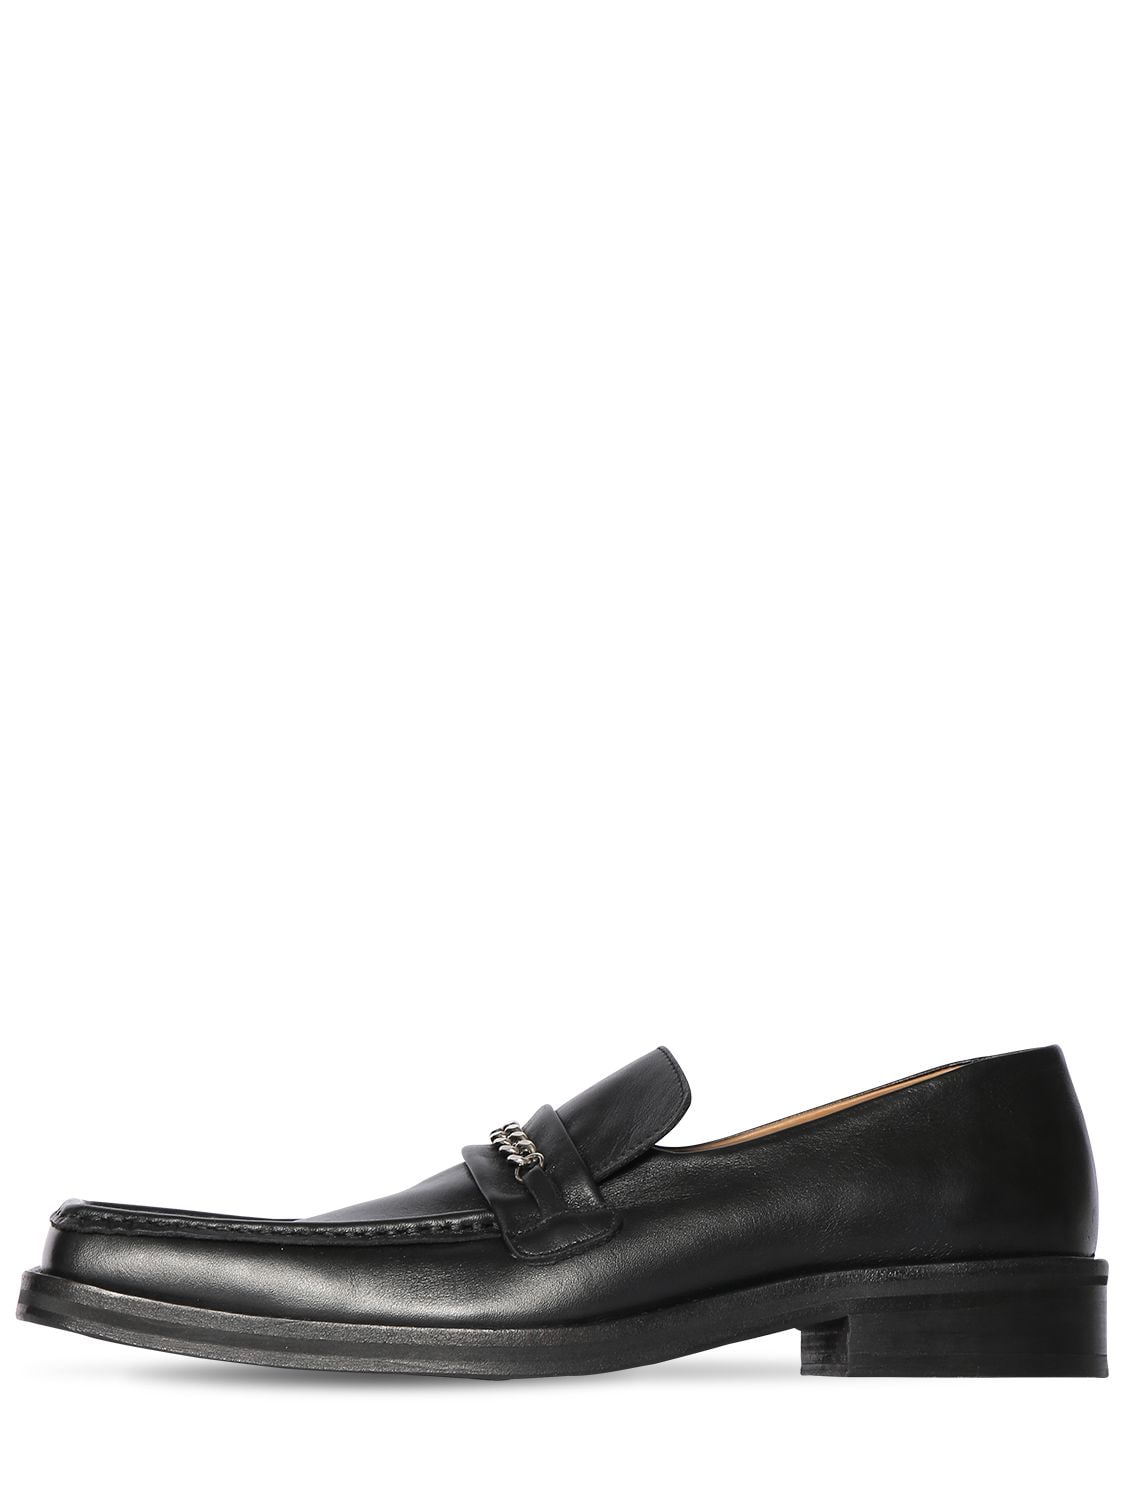 Martine Rose 40mm Leather Loafers In Black